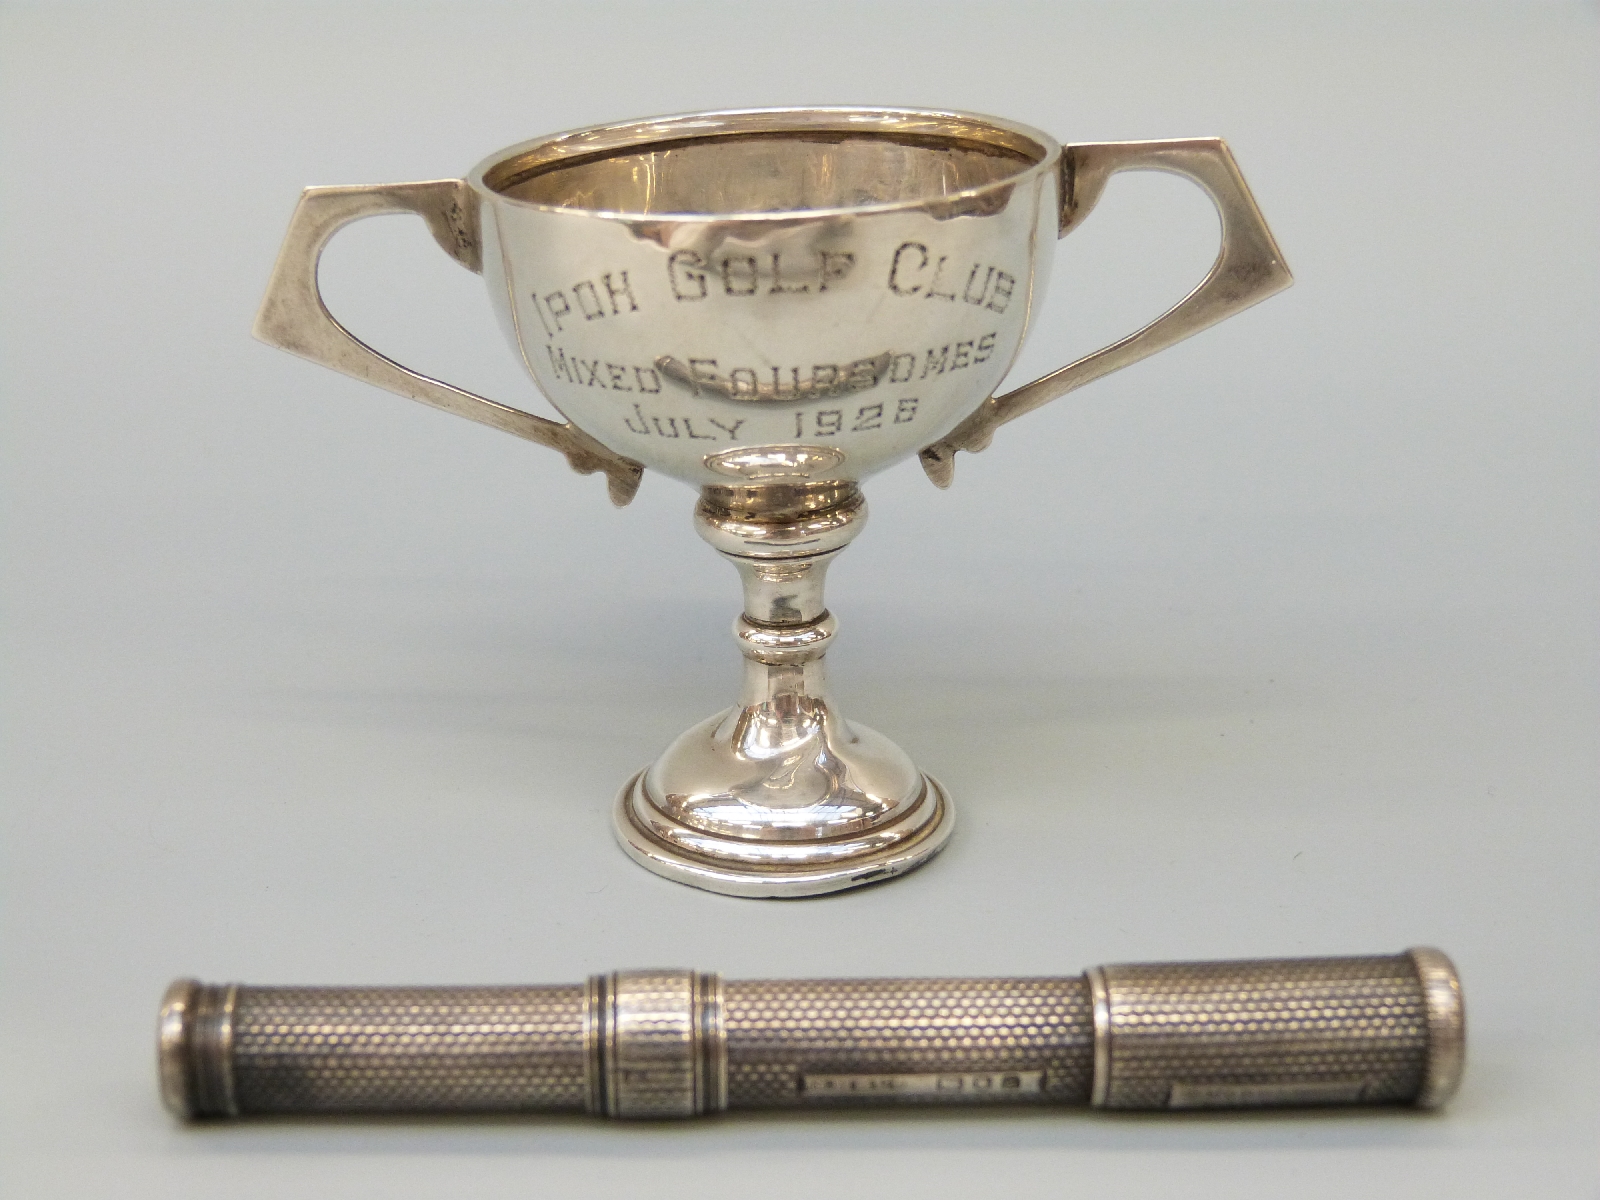 S. Mordan & Co Patent hallmarked silver double ended pen/pencil and a small silver trophy.